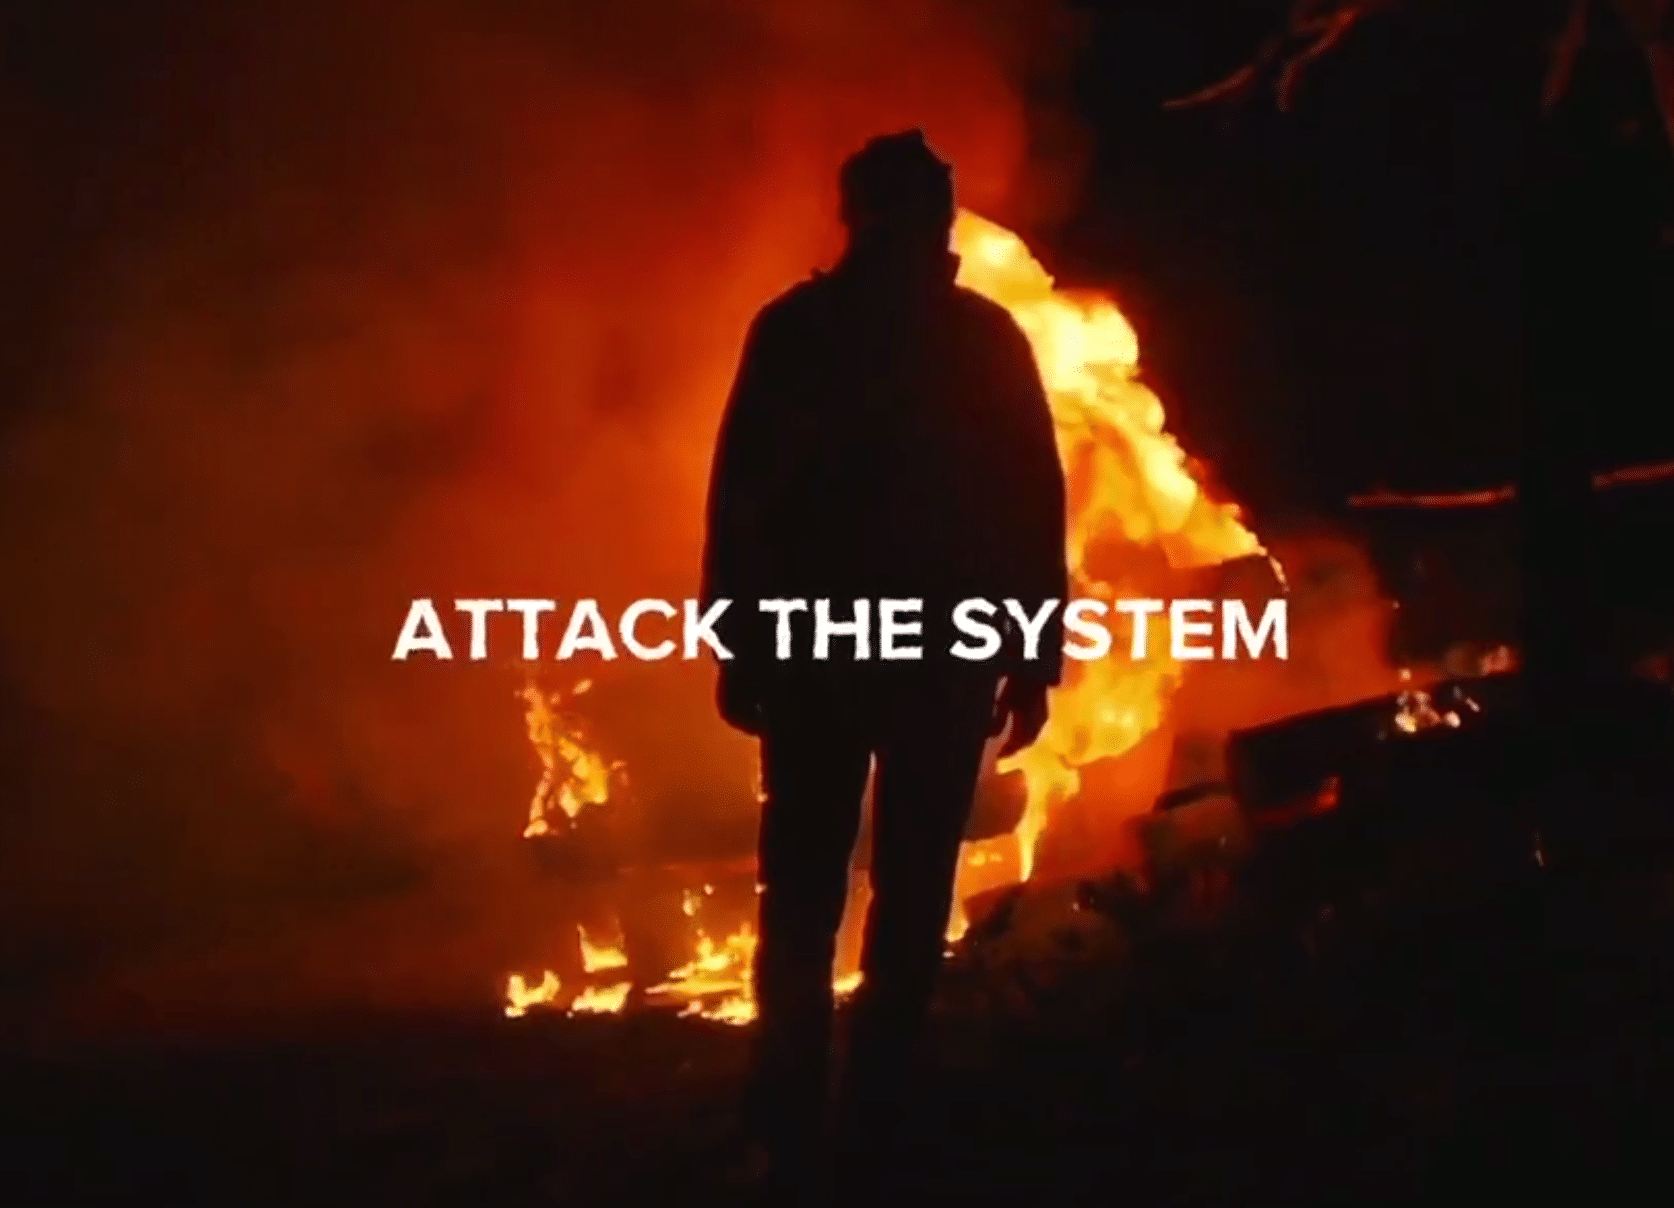 (Right Wing Extremism) Accelerationist Share Video Advocating to 'Attack The System, The System Will Collapse' - 25 January 2023